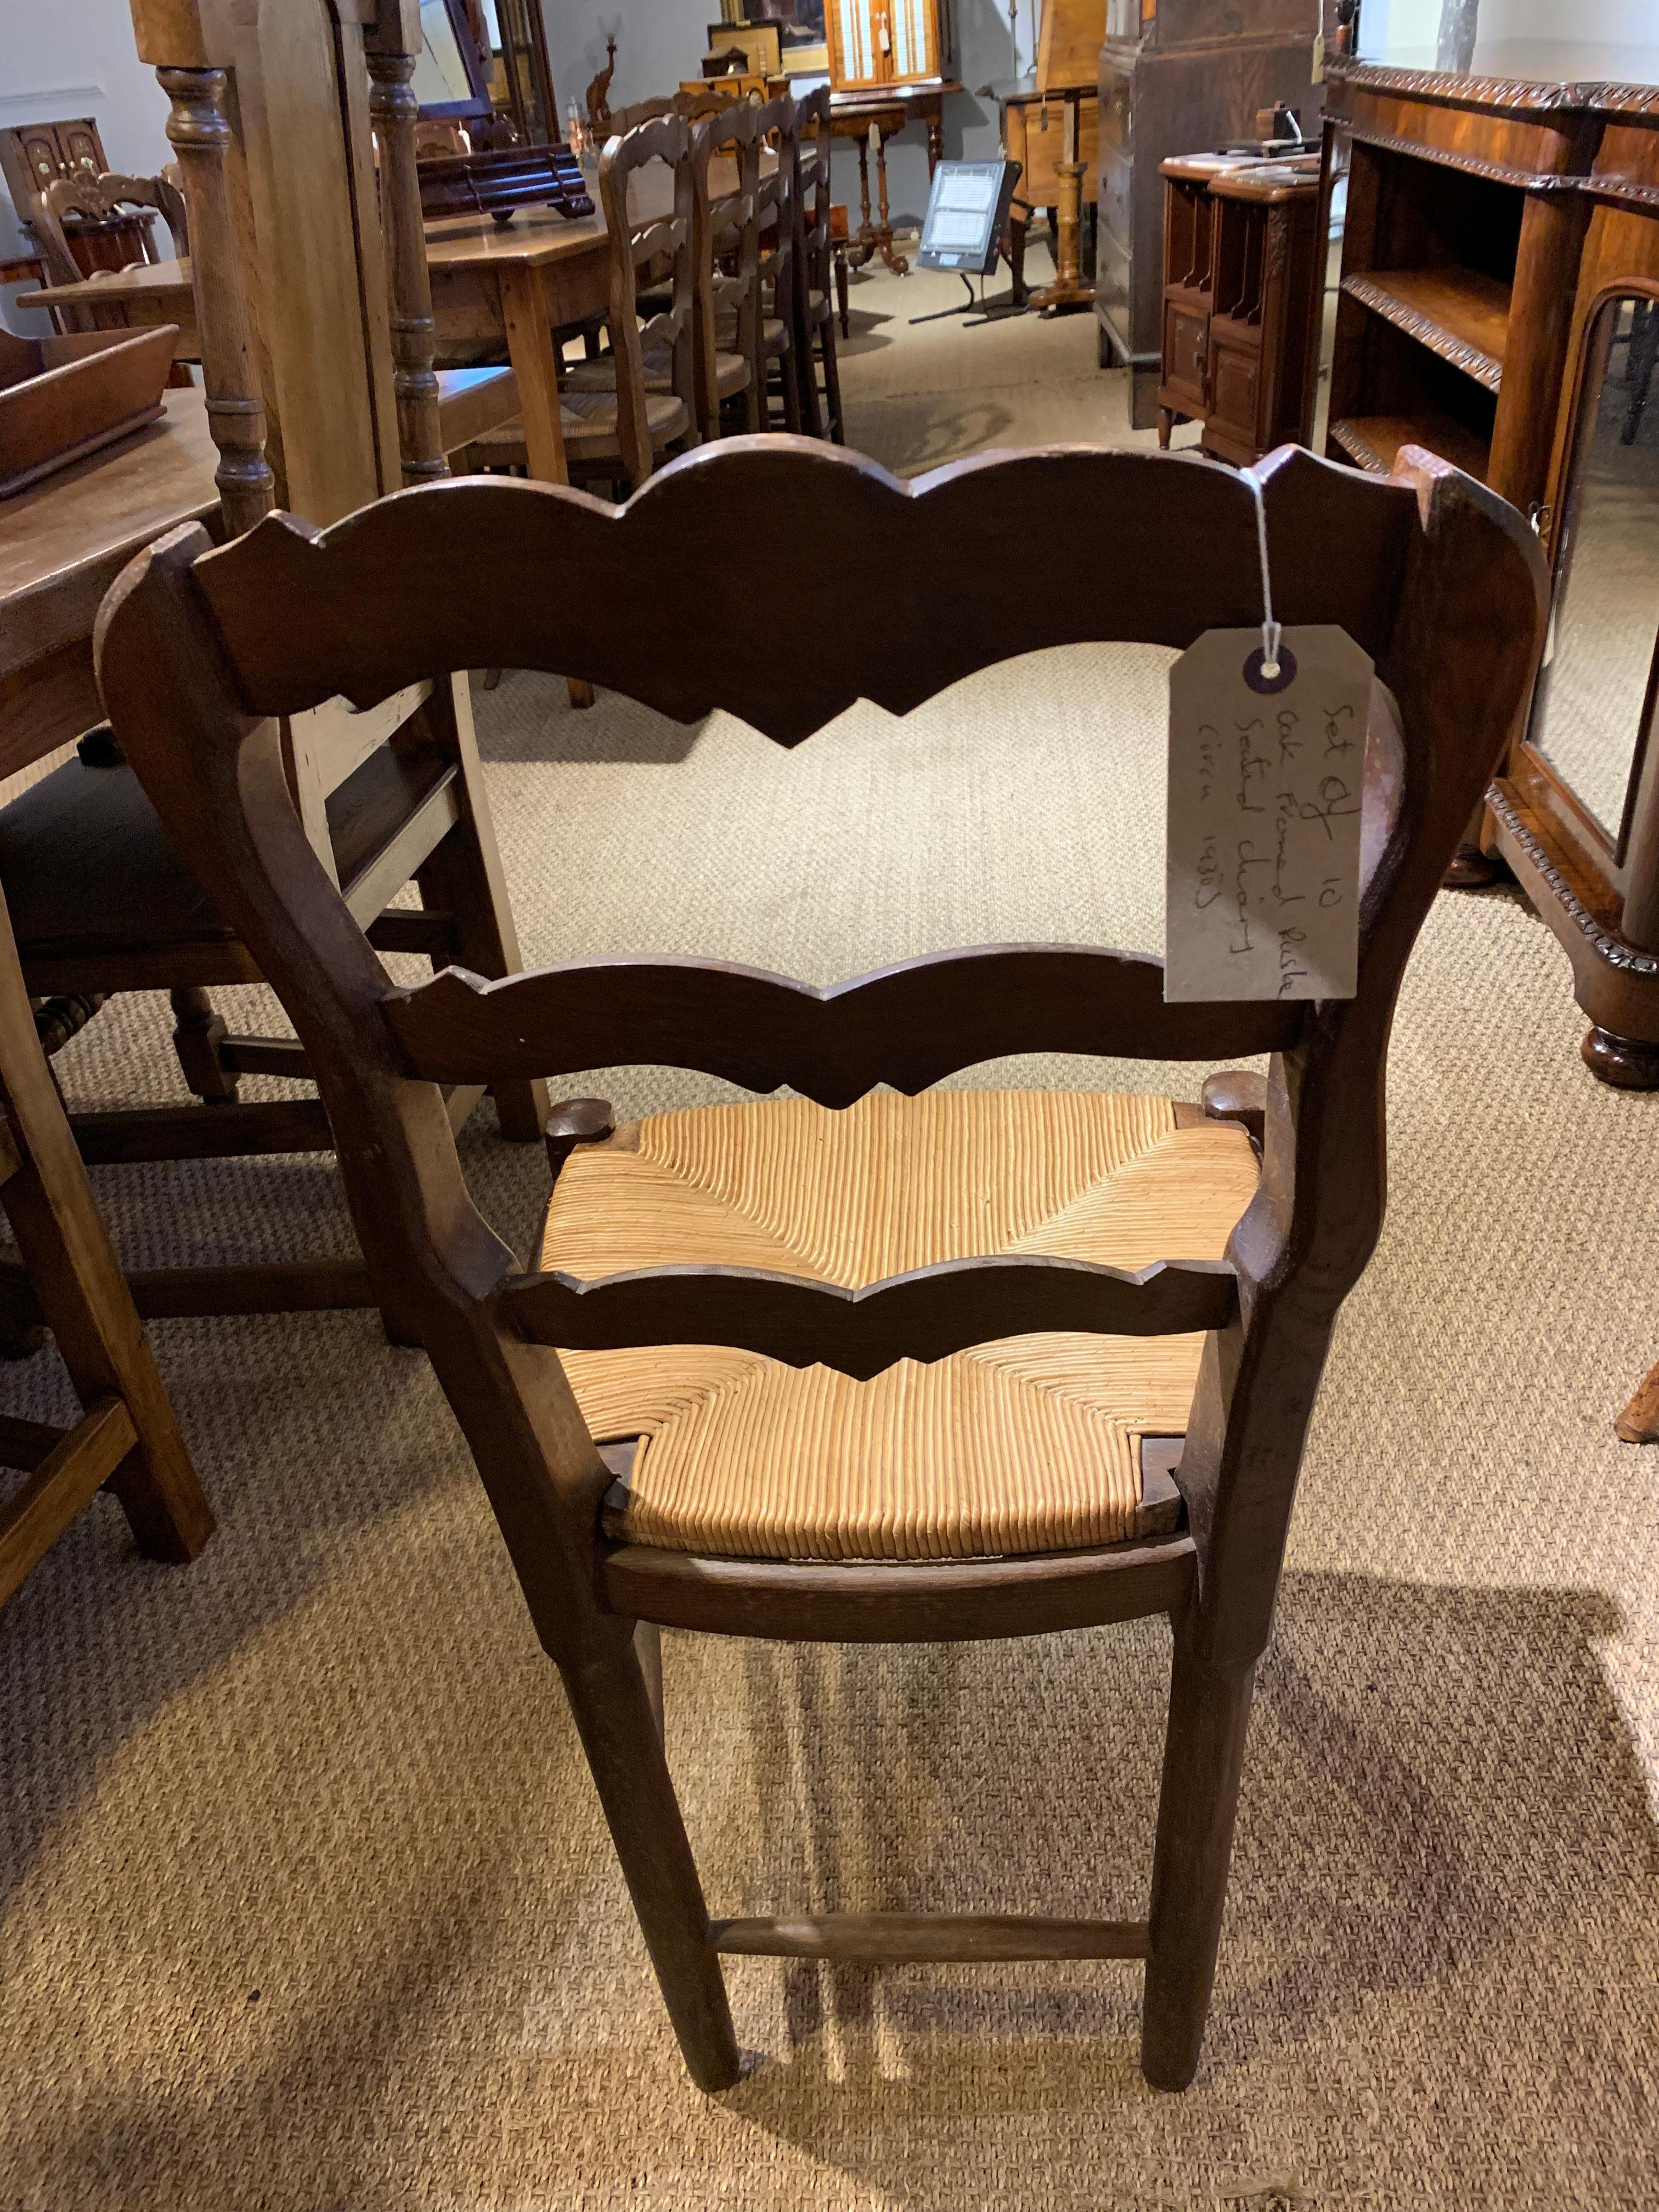 10 Rush Seated Oak Dining Chairs In Good Condition For Sale In Honiton, Devon